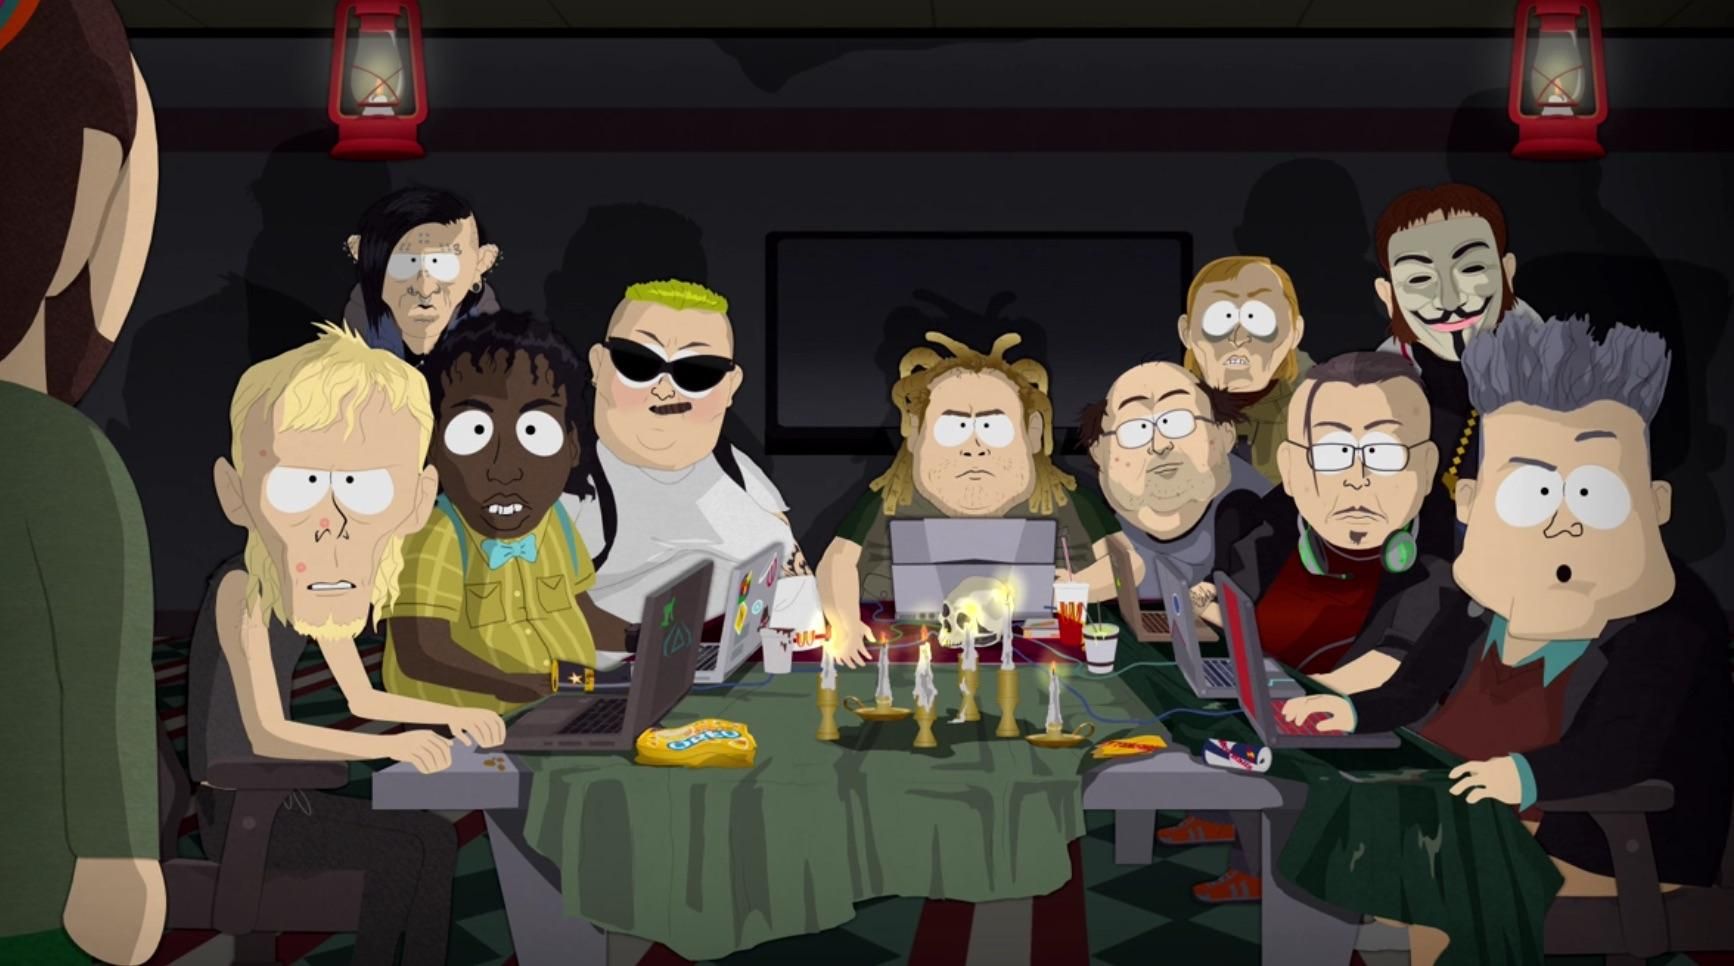 South Park really nails how I picture internet trolls.